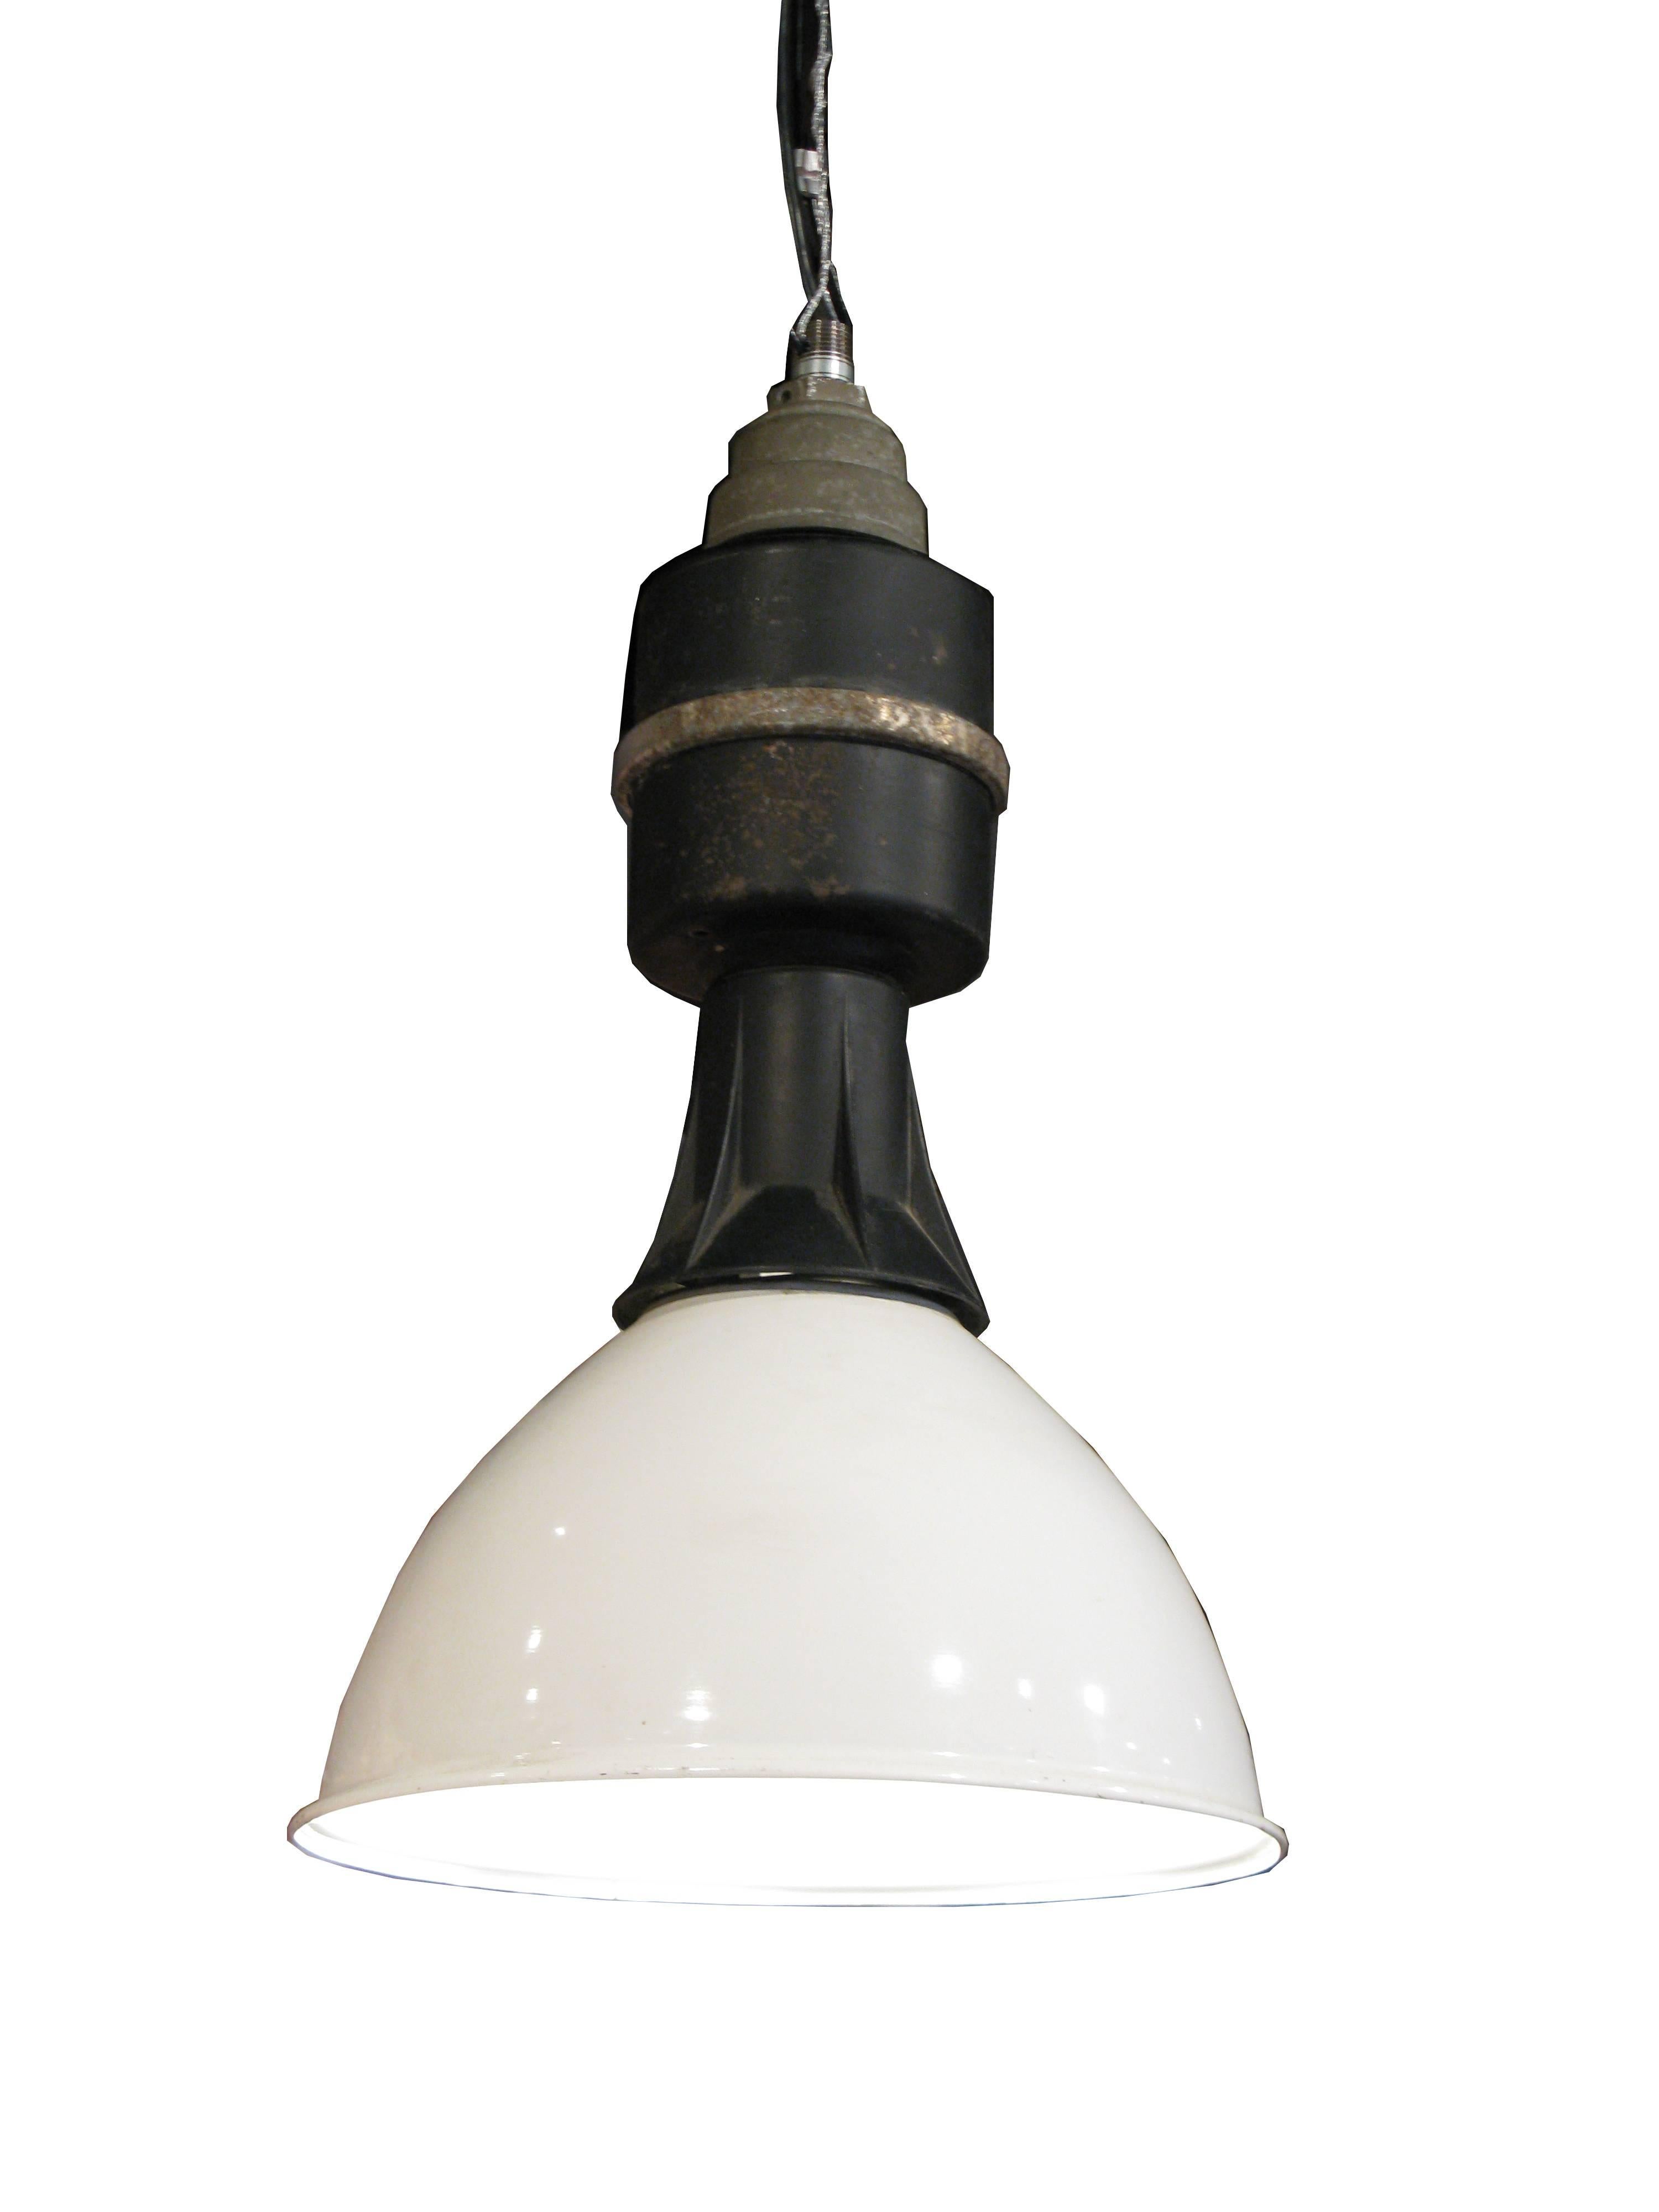 Set of Three Industrial Black and White Pendant Lights In Good Condition For Sale In San Francisco, CA